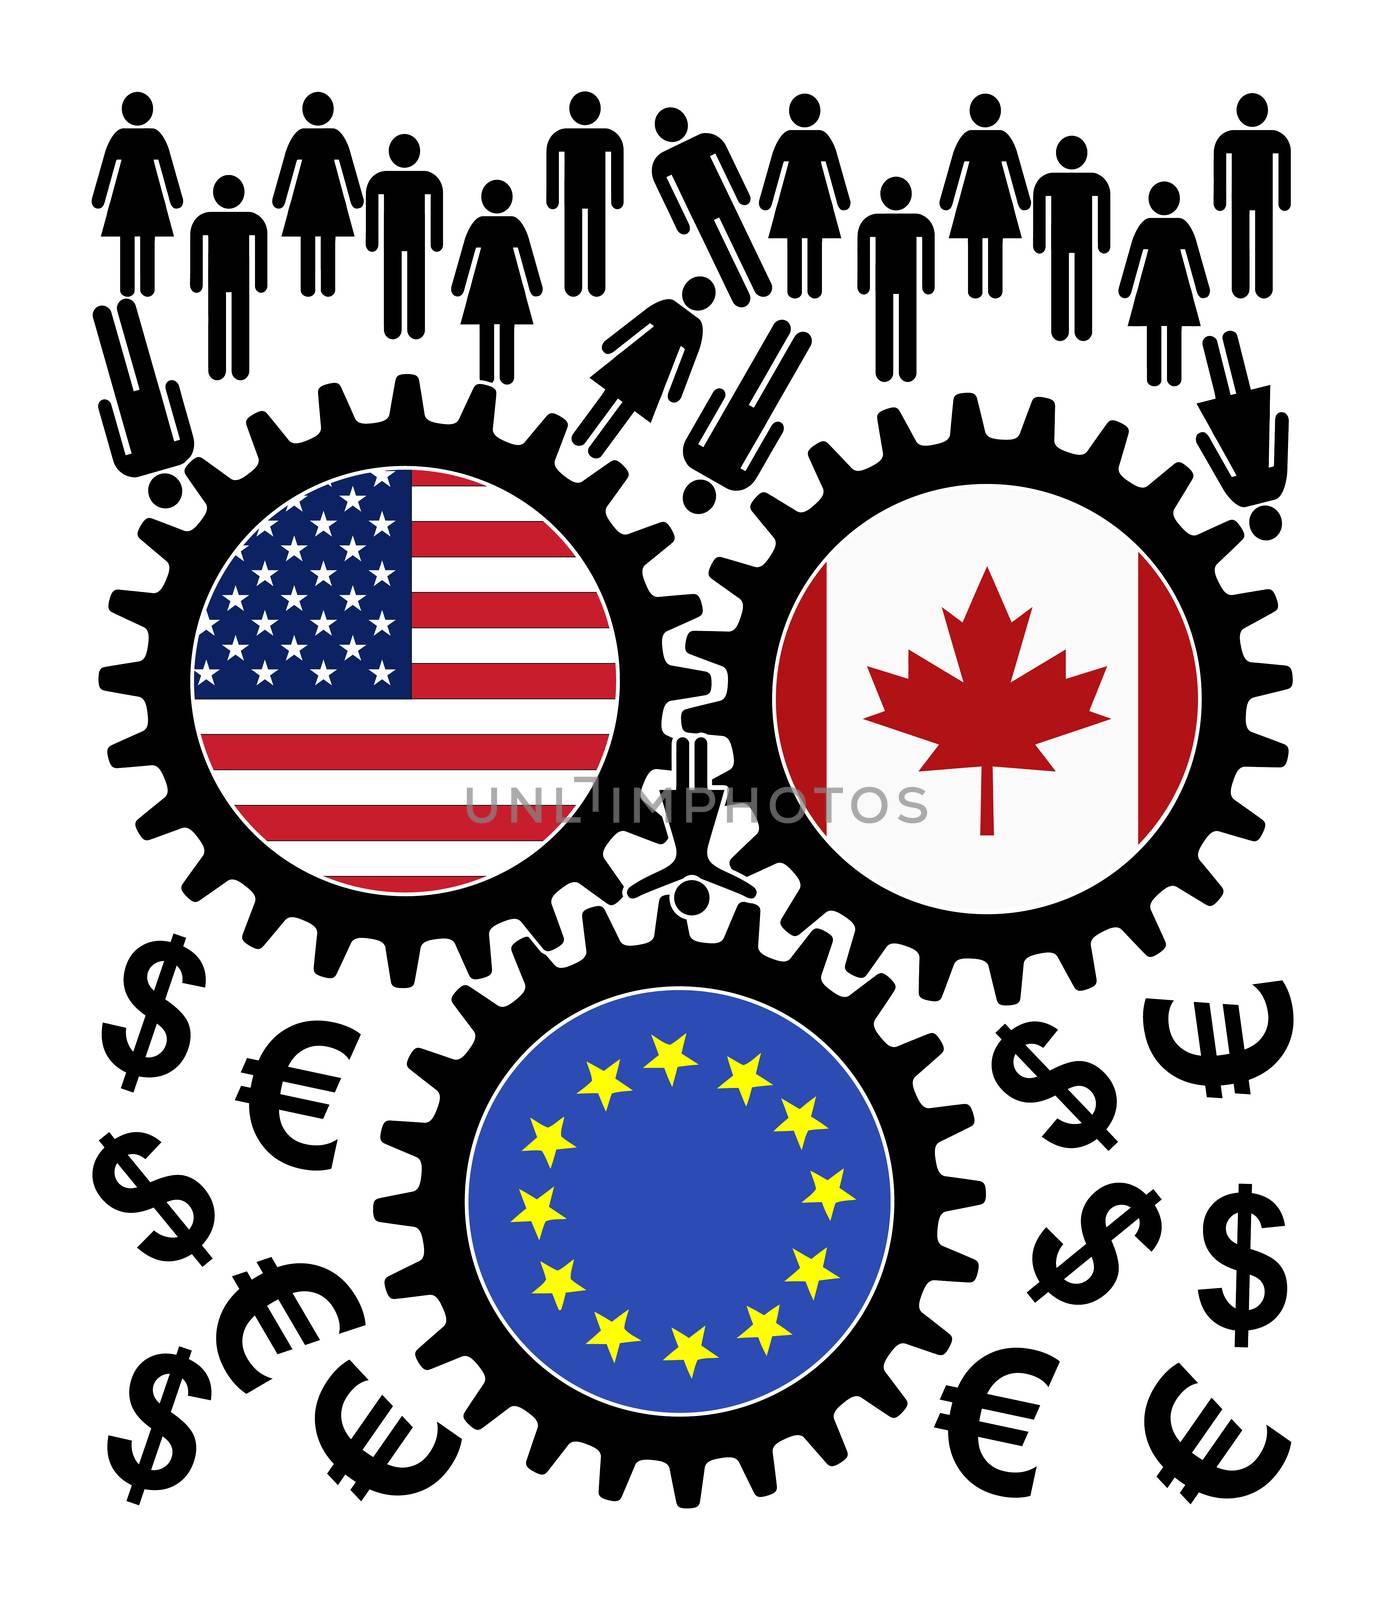 People in fear of the free trade agreement between Canada and the European Union